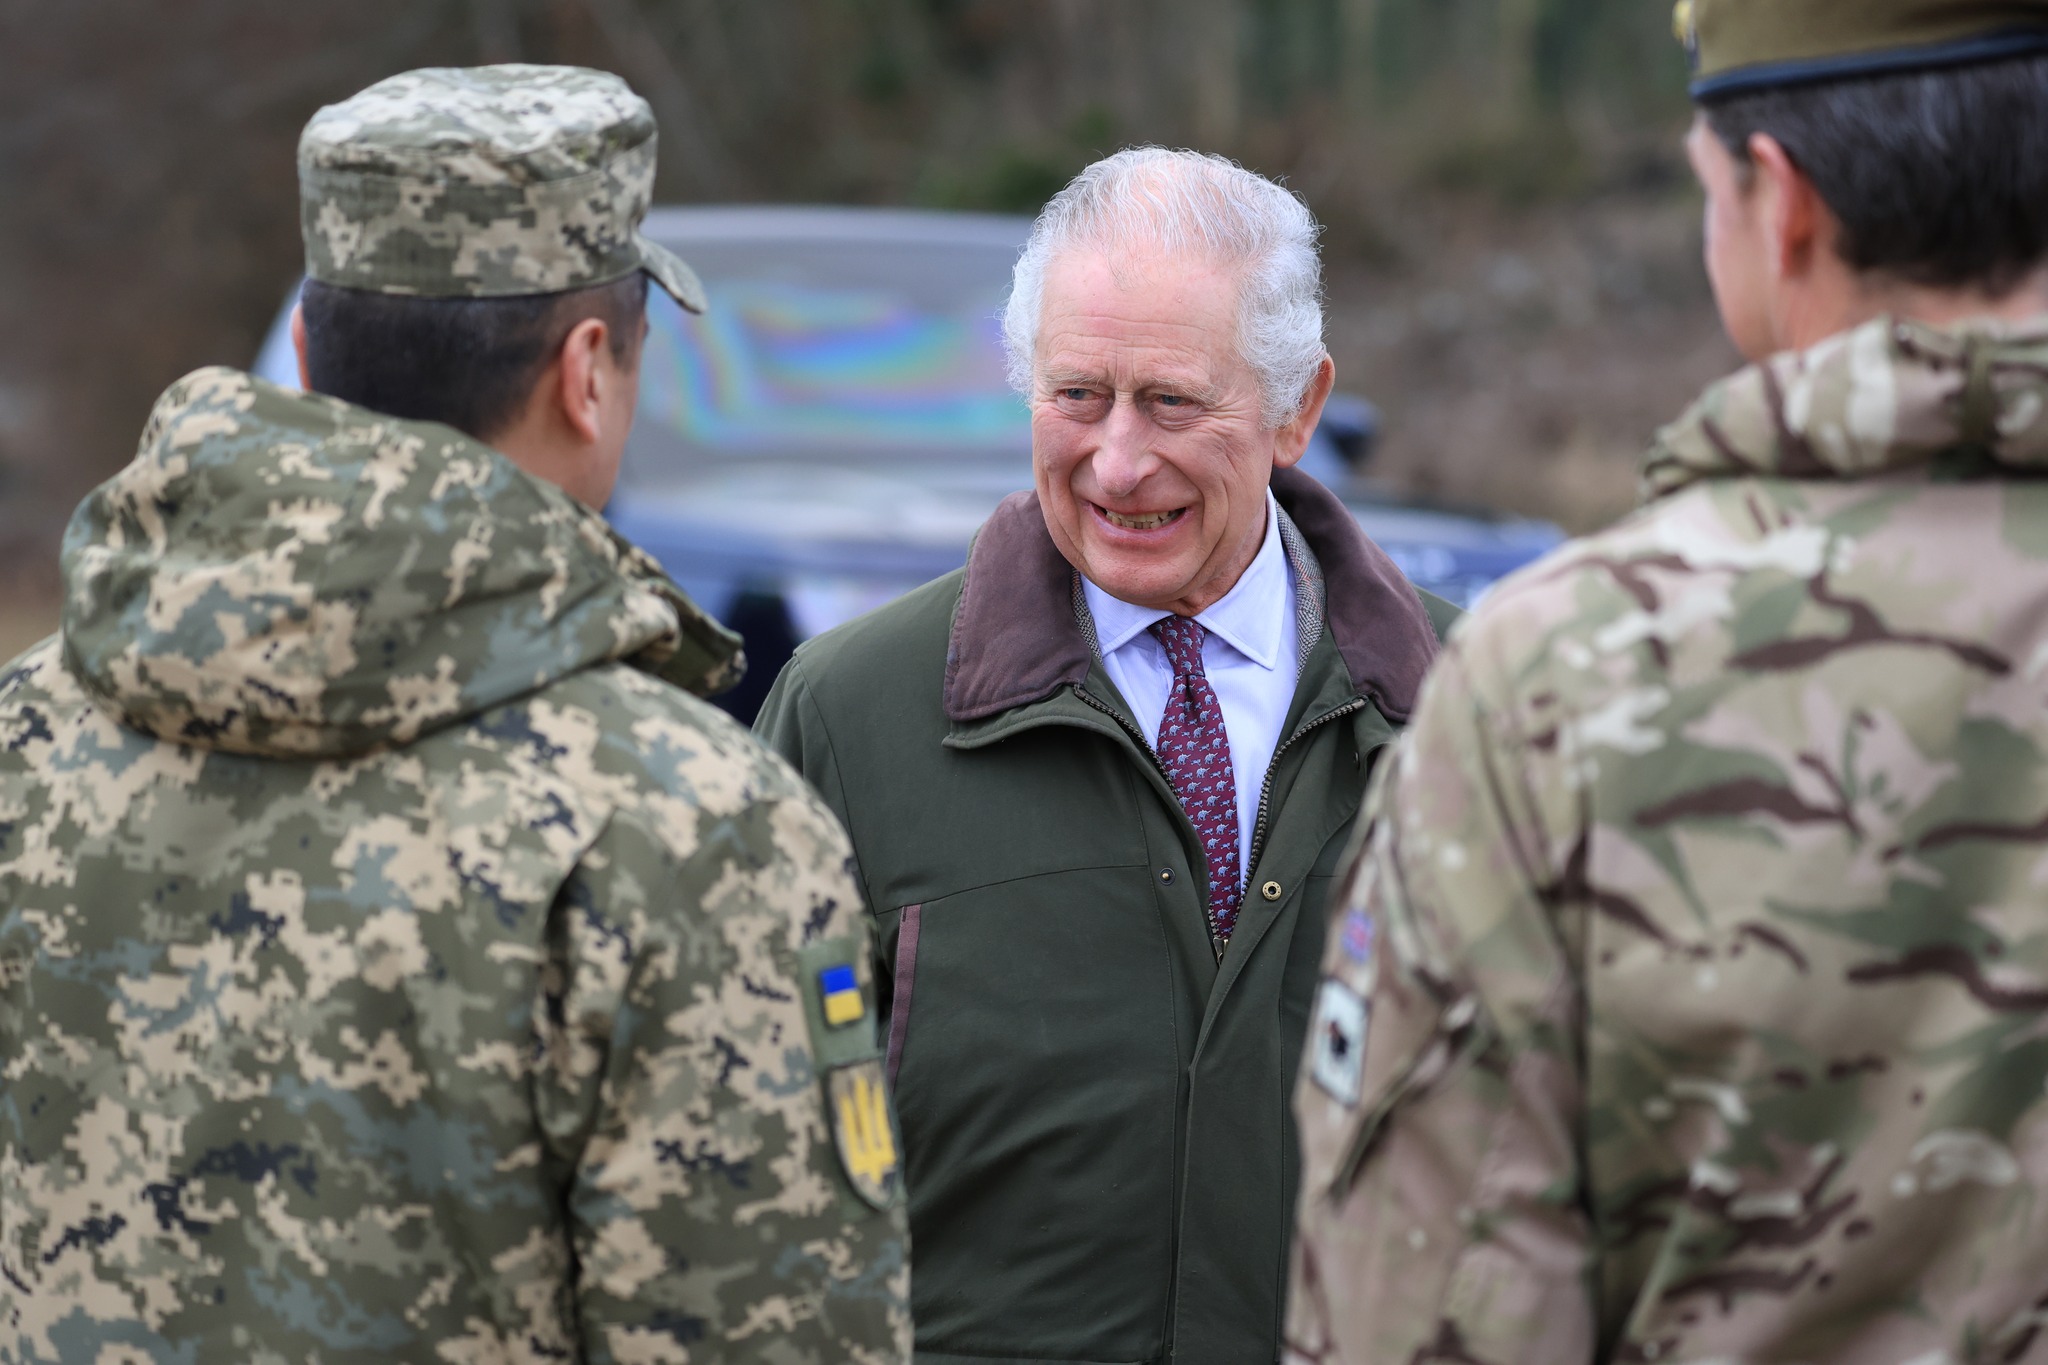 King Charles III visited Ukrainian military recruits undergoing training in Wiltshire today (20/02/2023).

The monarch watched a short defensive training exercise and met some of the recruits training with British and international partner forces.

The five-week mission delivers basic combat training to Ukrainians, who will then return to fight in their country.

The King, accompanied by General Sir Patrick Sanders, the Chief of General Staff, also met other international military personnel who are helping